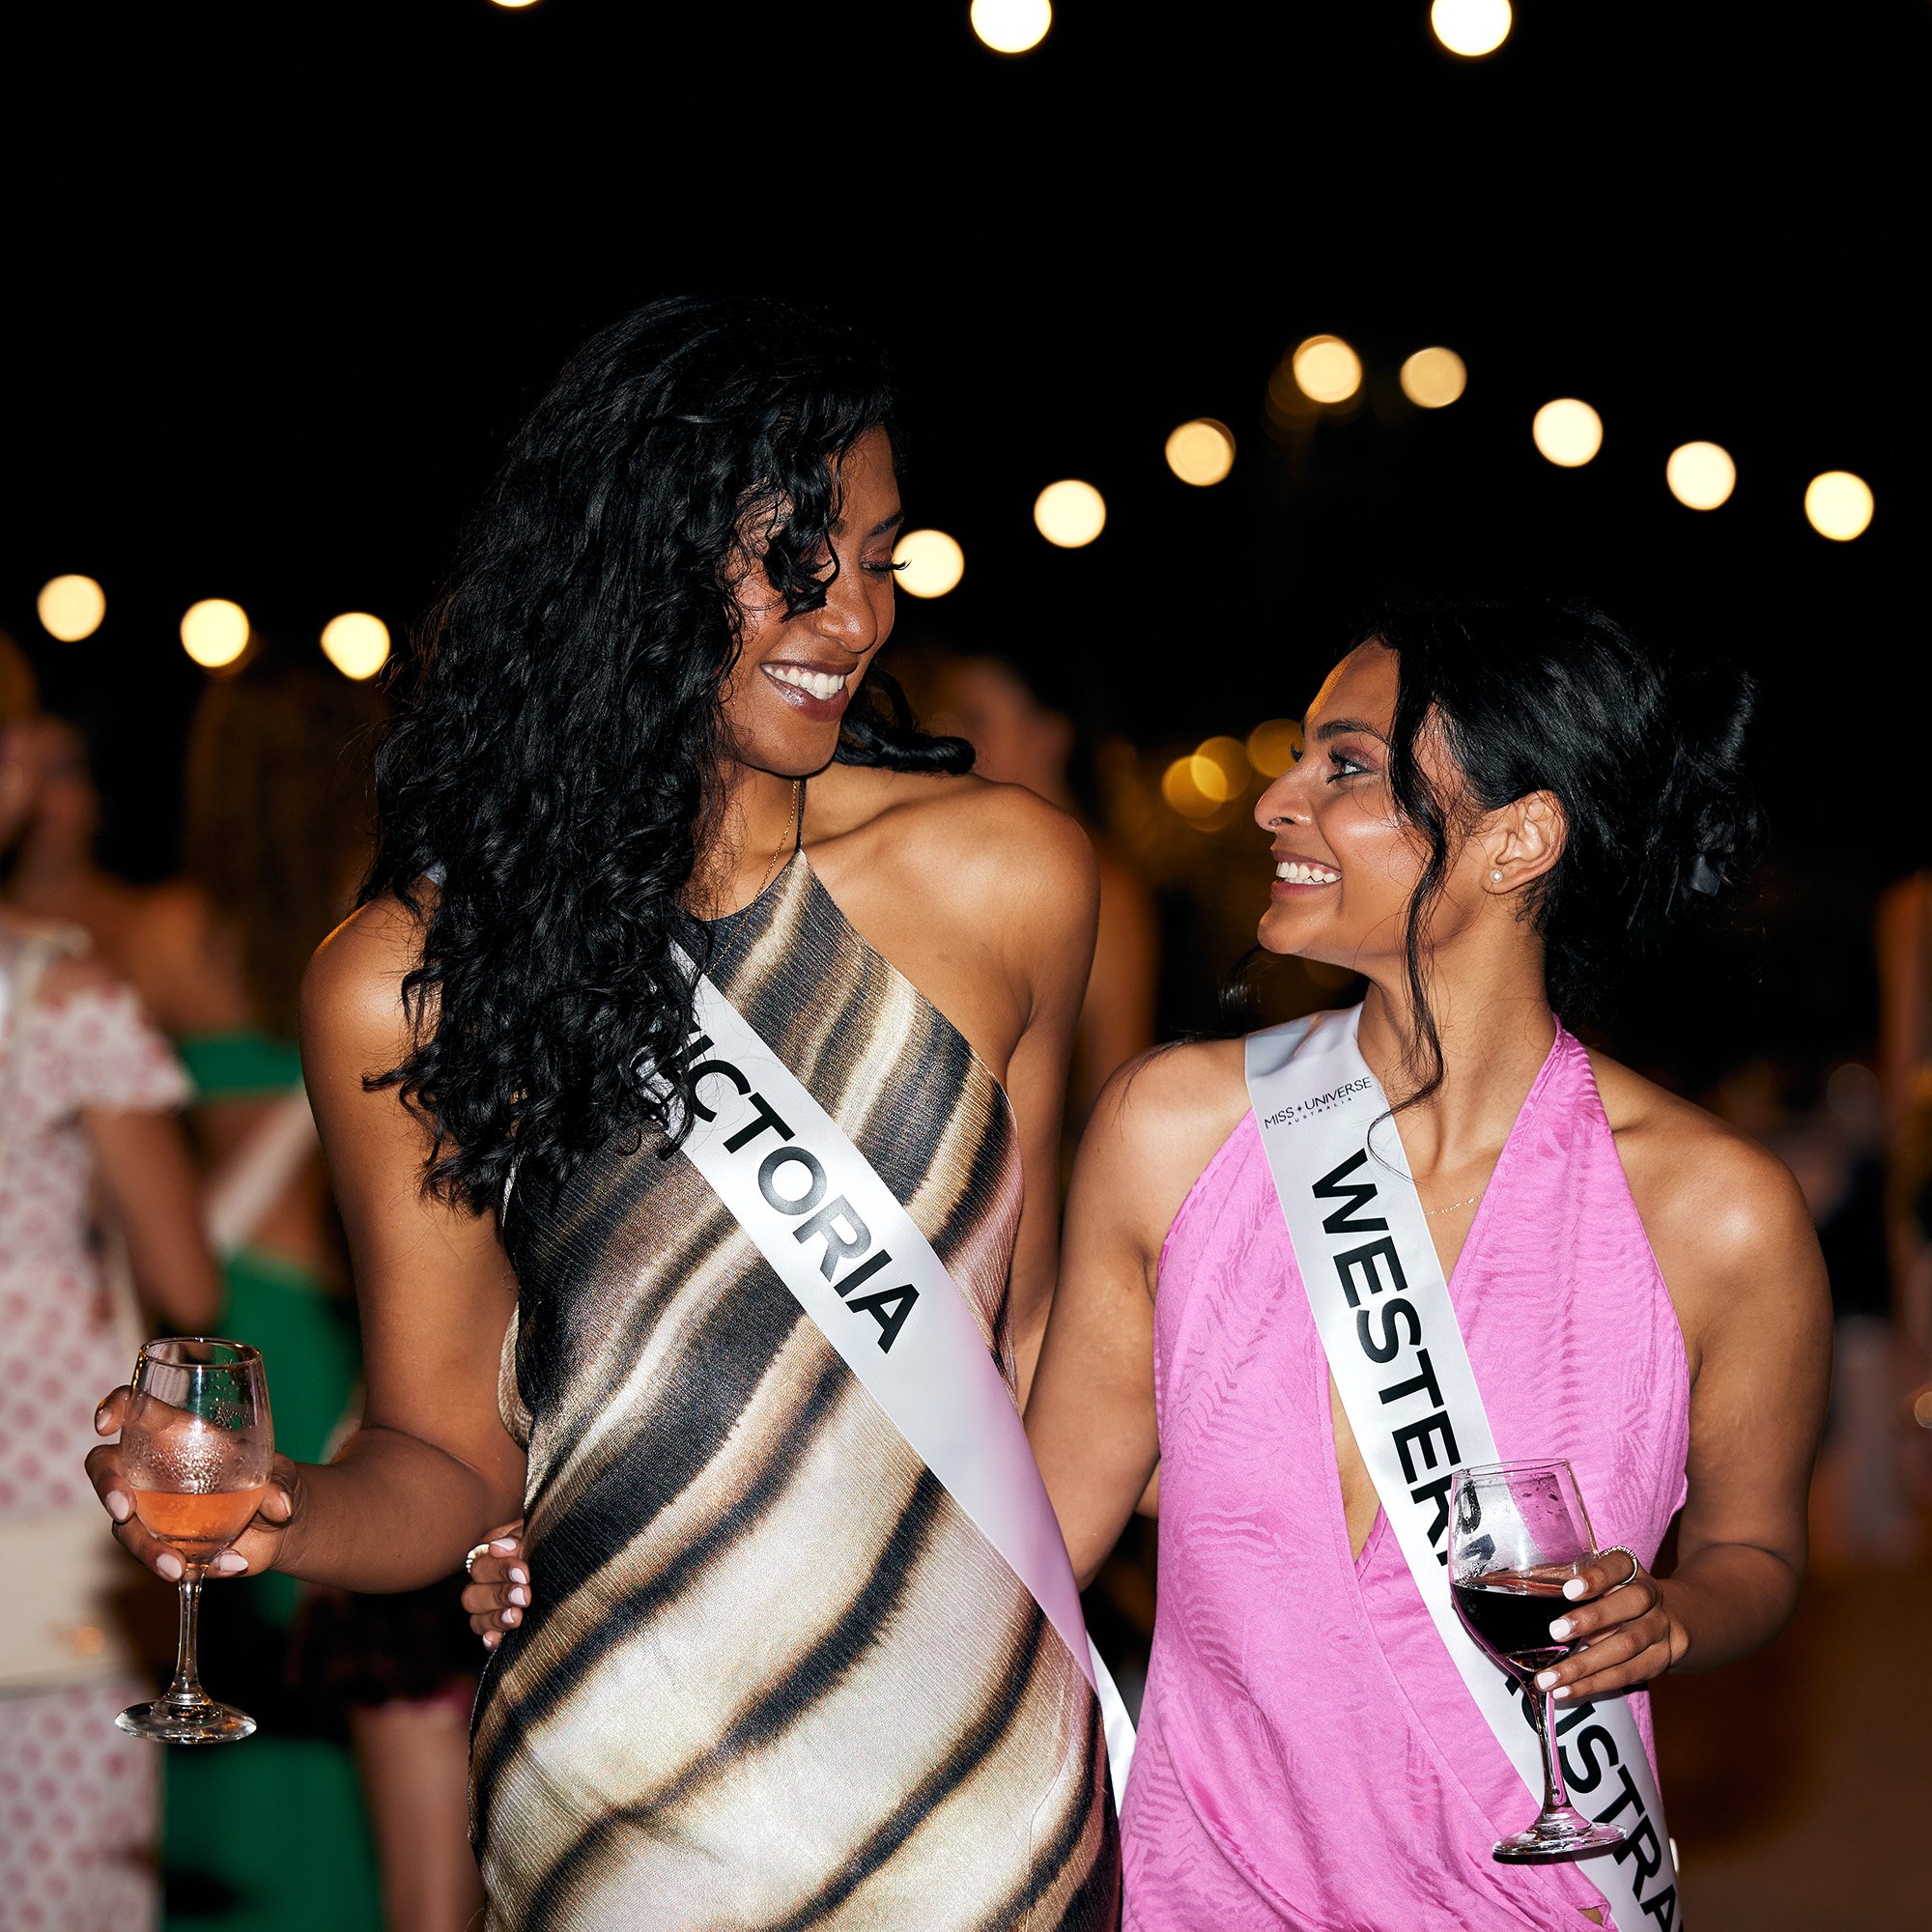 2 women wearing sash's at a beach party